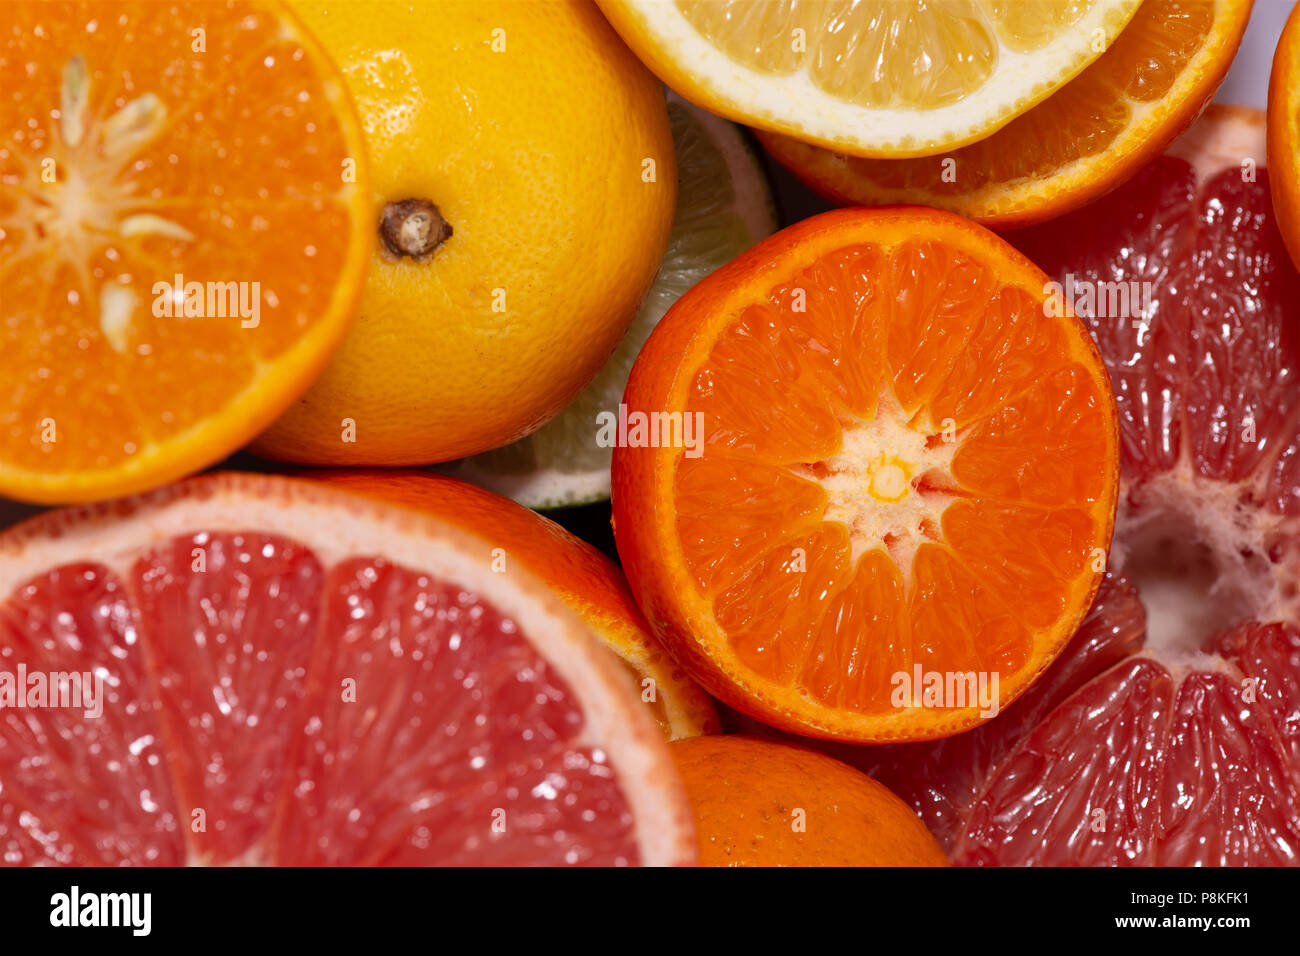 Close up on juicy fresh cut citrus fruits with rose grapefruit, orange, lemon and clementines in a full frame view Stock Photo